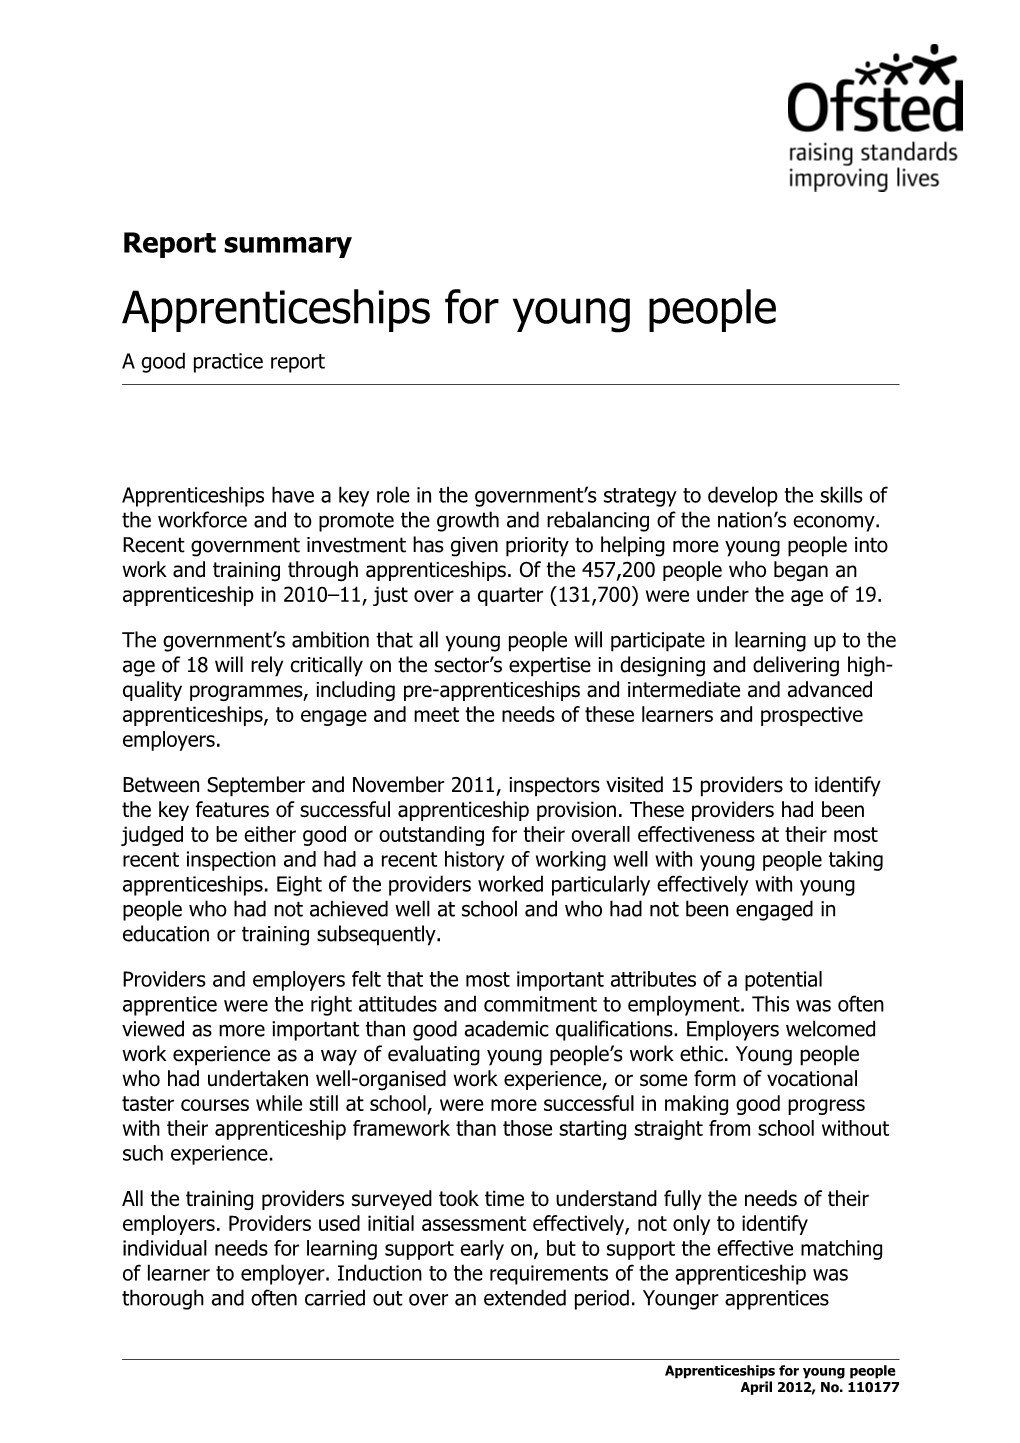 Apprenticeships for Young People